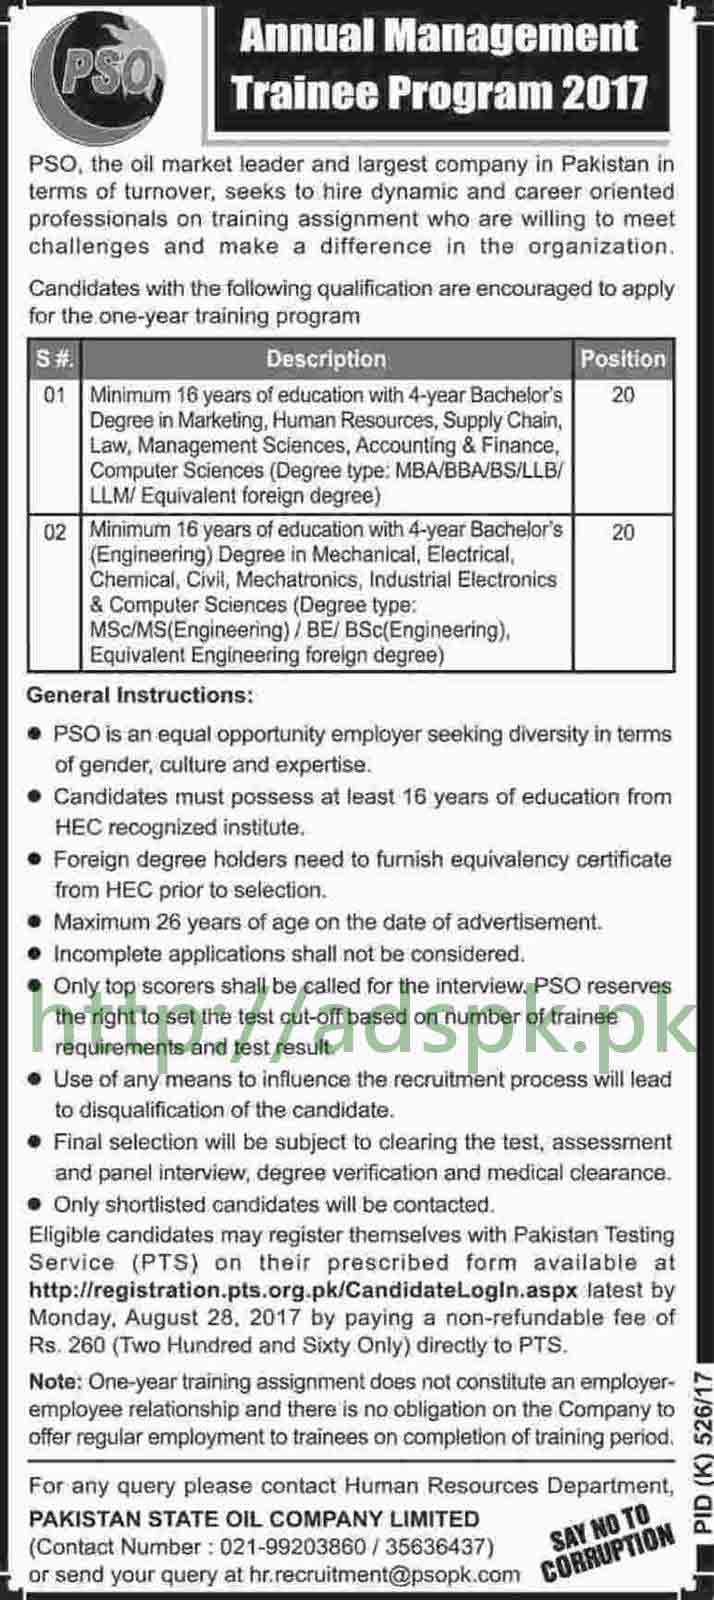 PTS Pakistan State Oil PSO Annual Management Training Program 2017 PTS PSO Written Test MCQs Syllabus Paper Application Form Deadline 28-08-2017 Apply Online Now